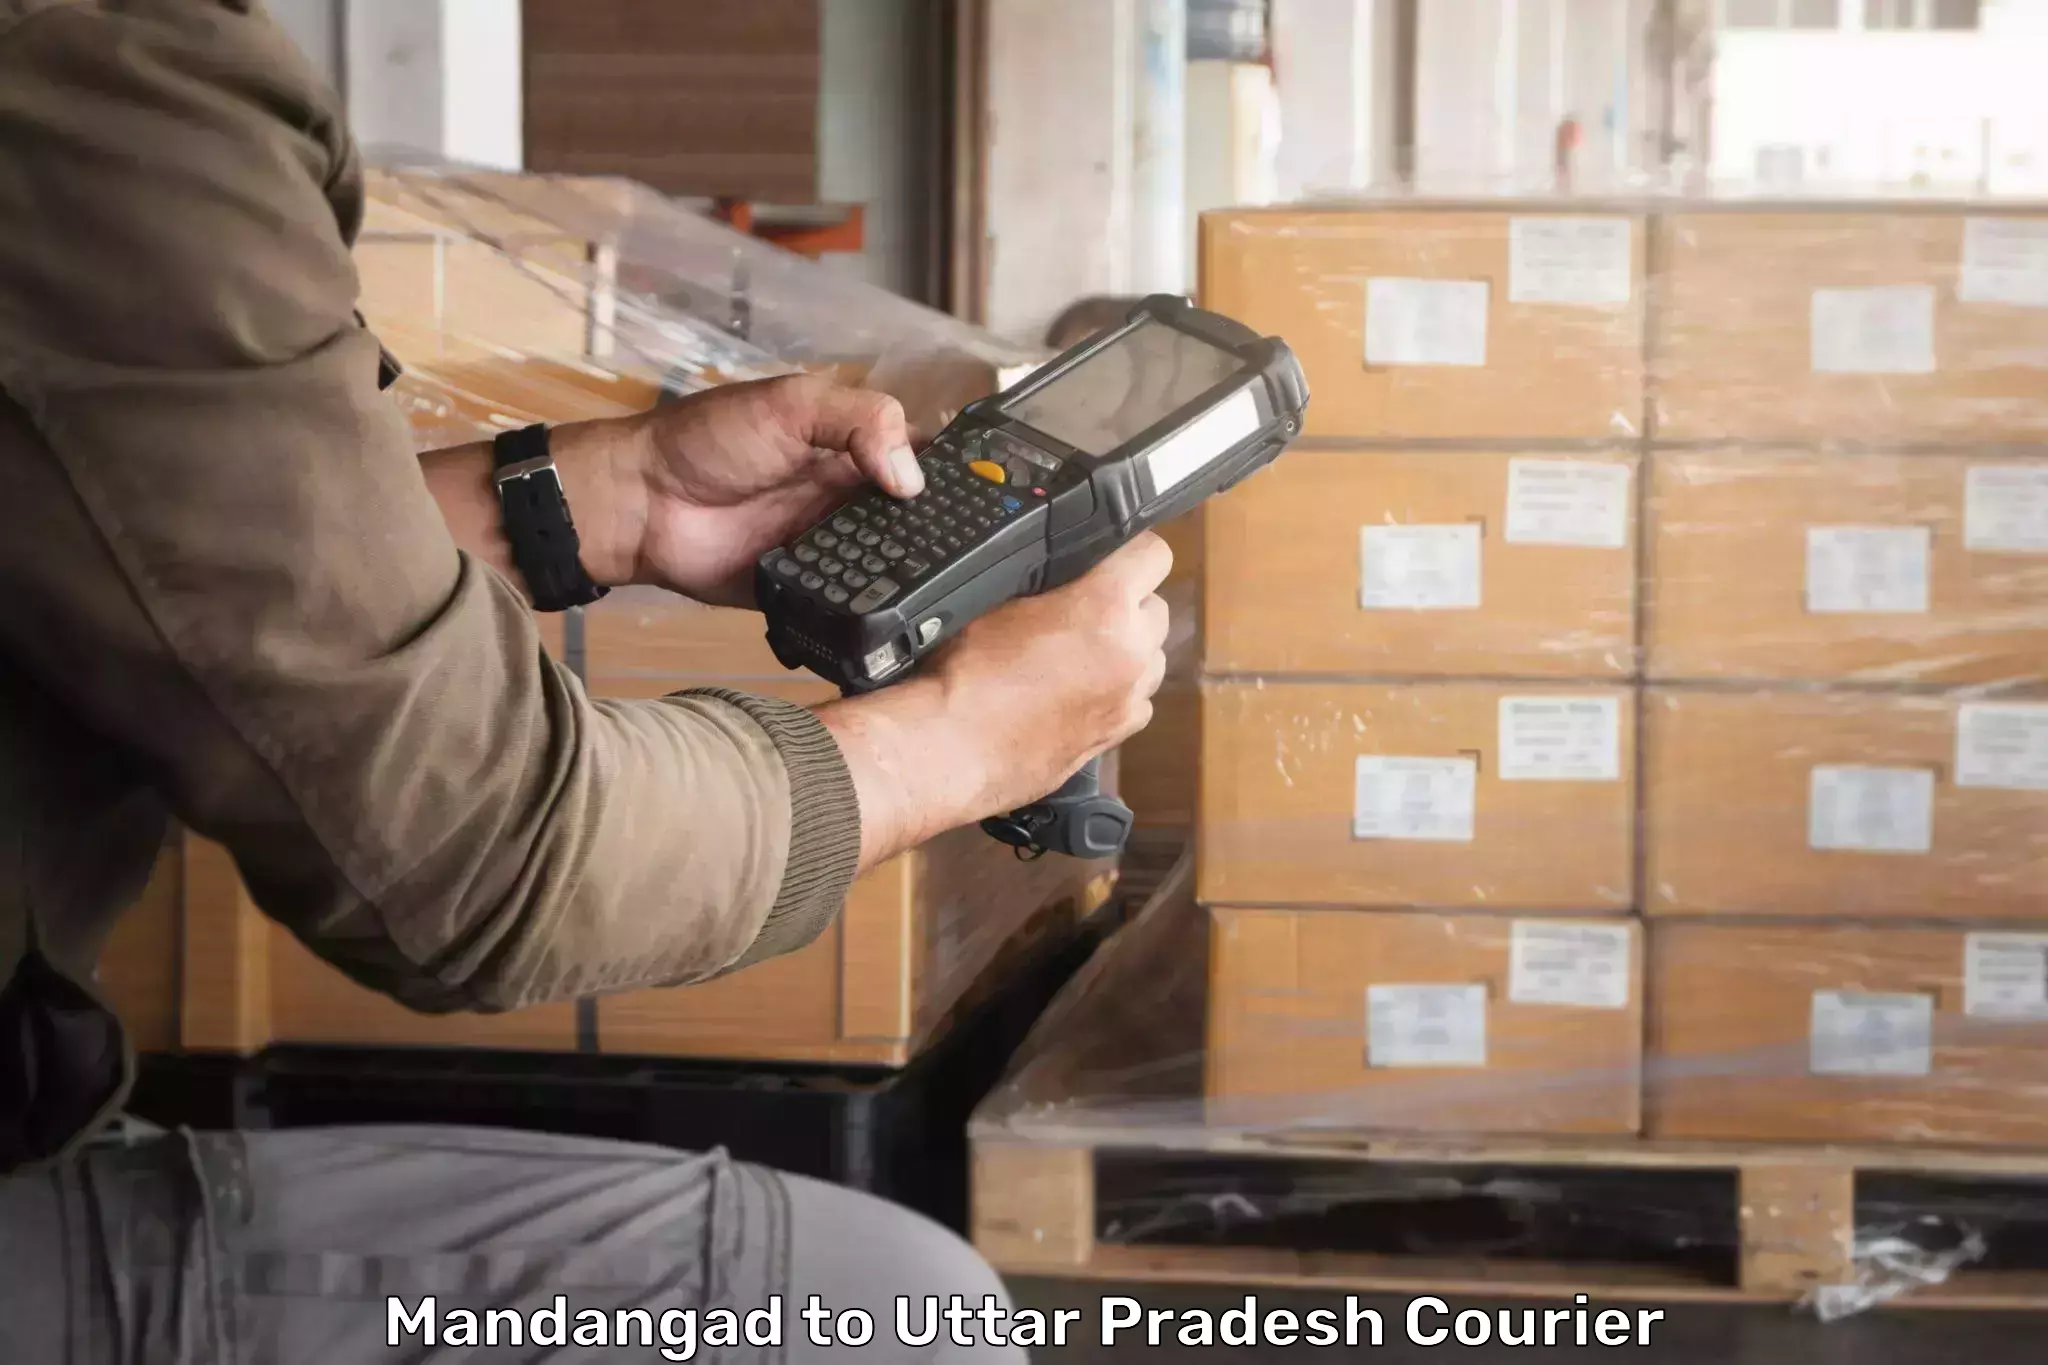 State-of-the-art courier technology Mandangad to Chitrakoot